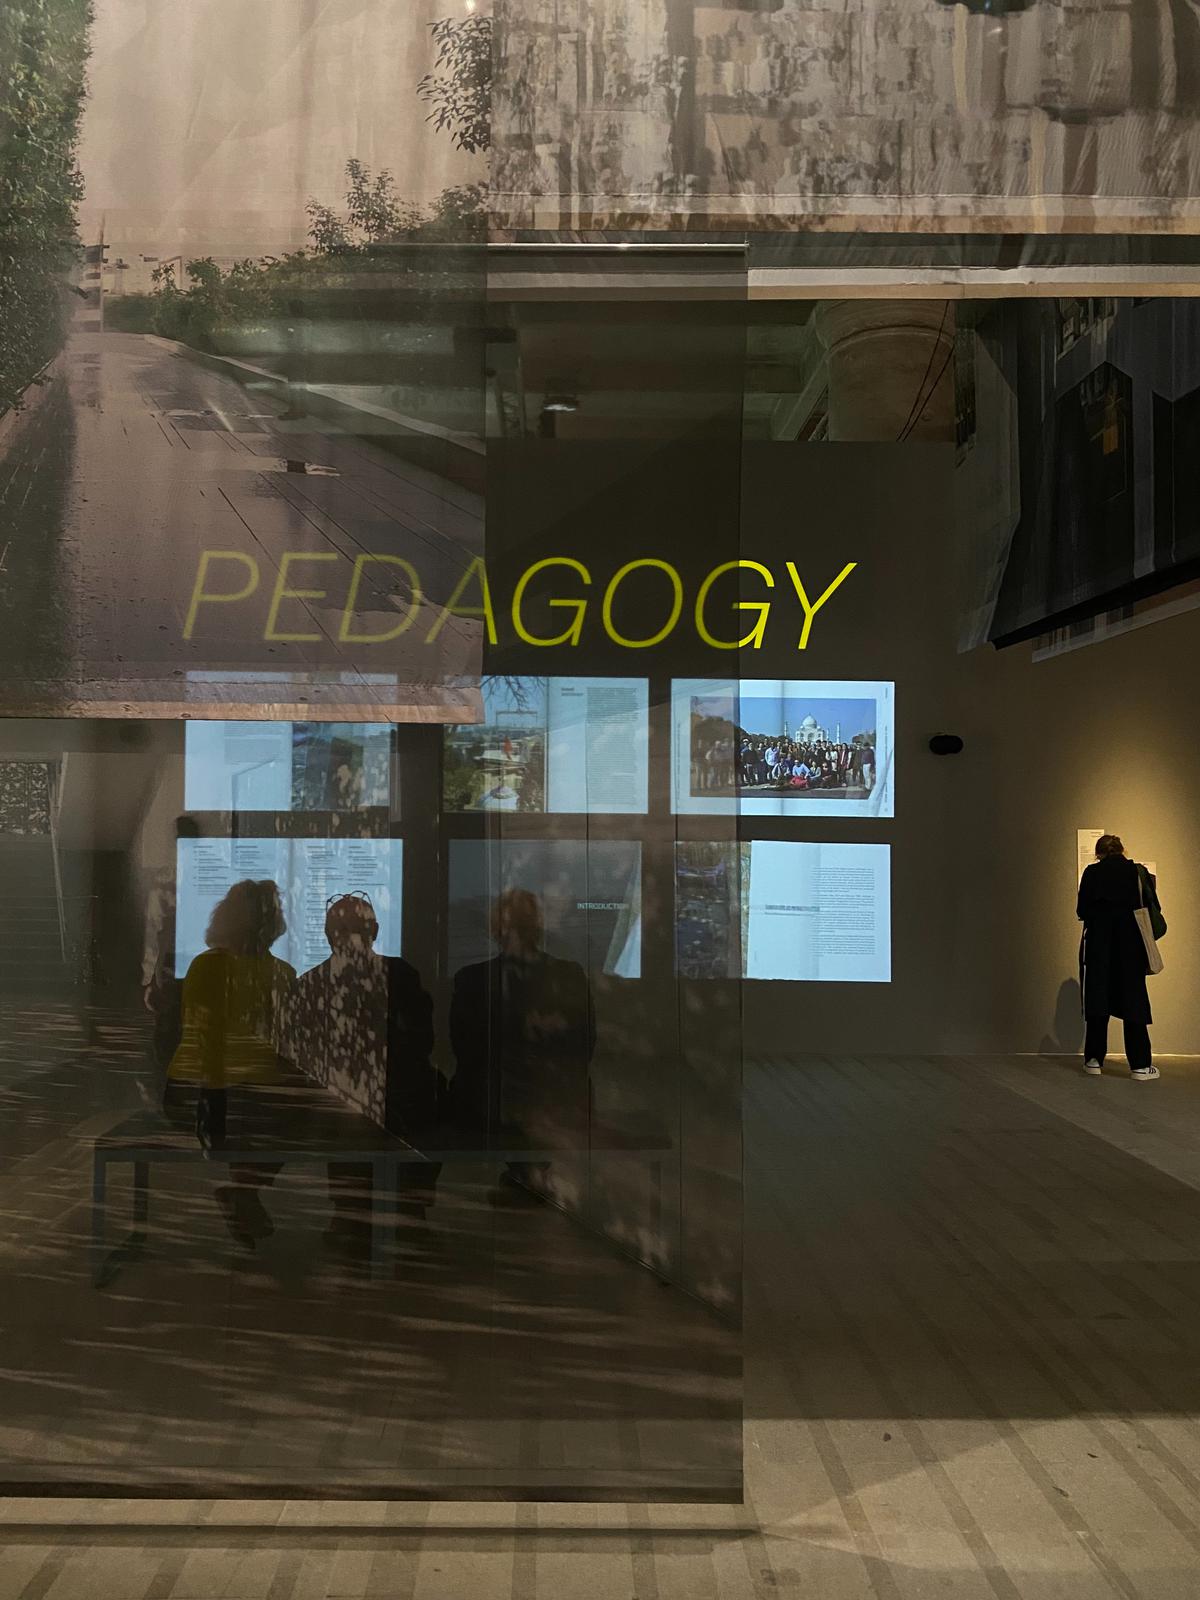  Taxonomy of Research, Advocacy, Practice and Pedagogy